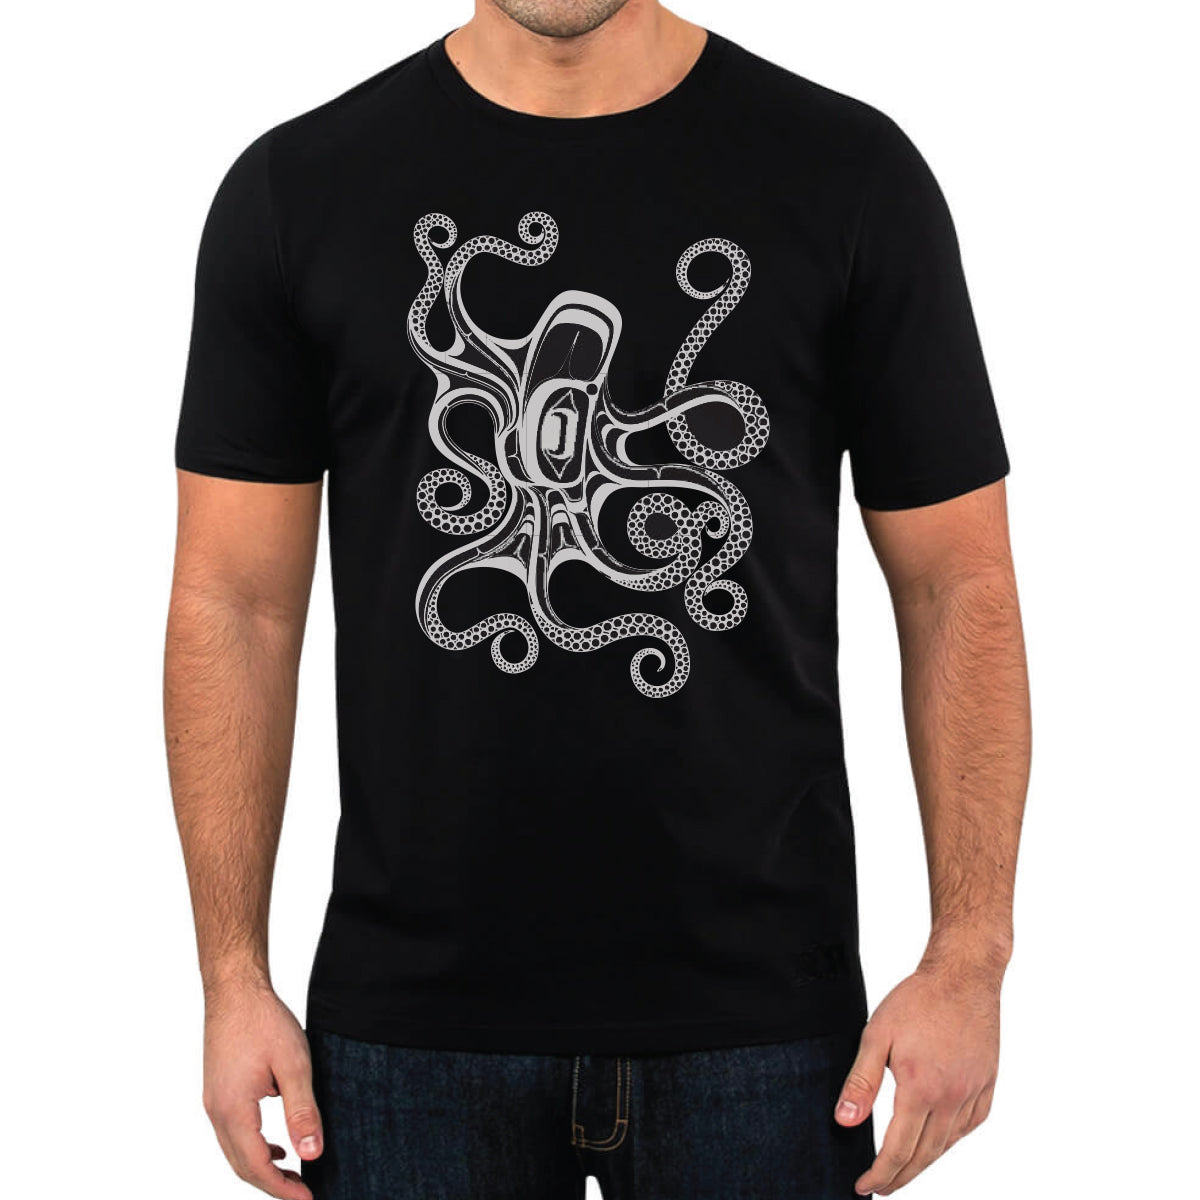 T Shirt Ernest Swanson Octopus - Black / XXL - TSSEOXXL - House of Himwitsa Native Art Gallery and Gifts